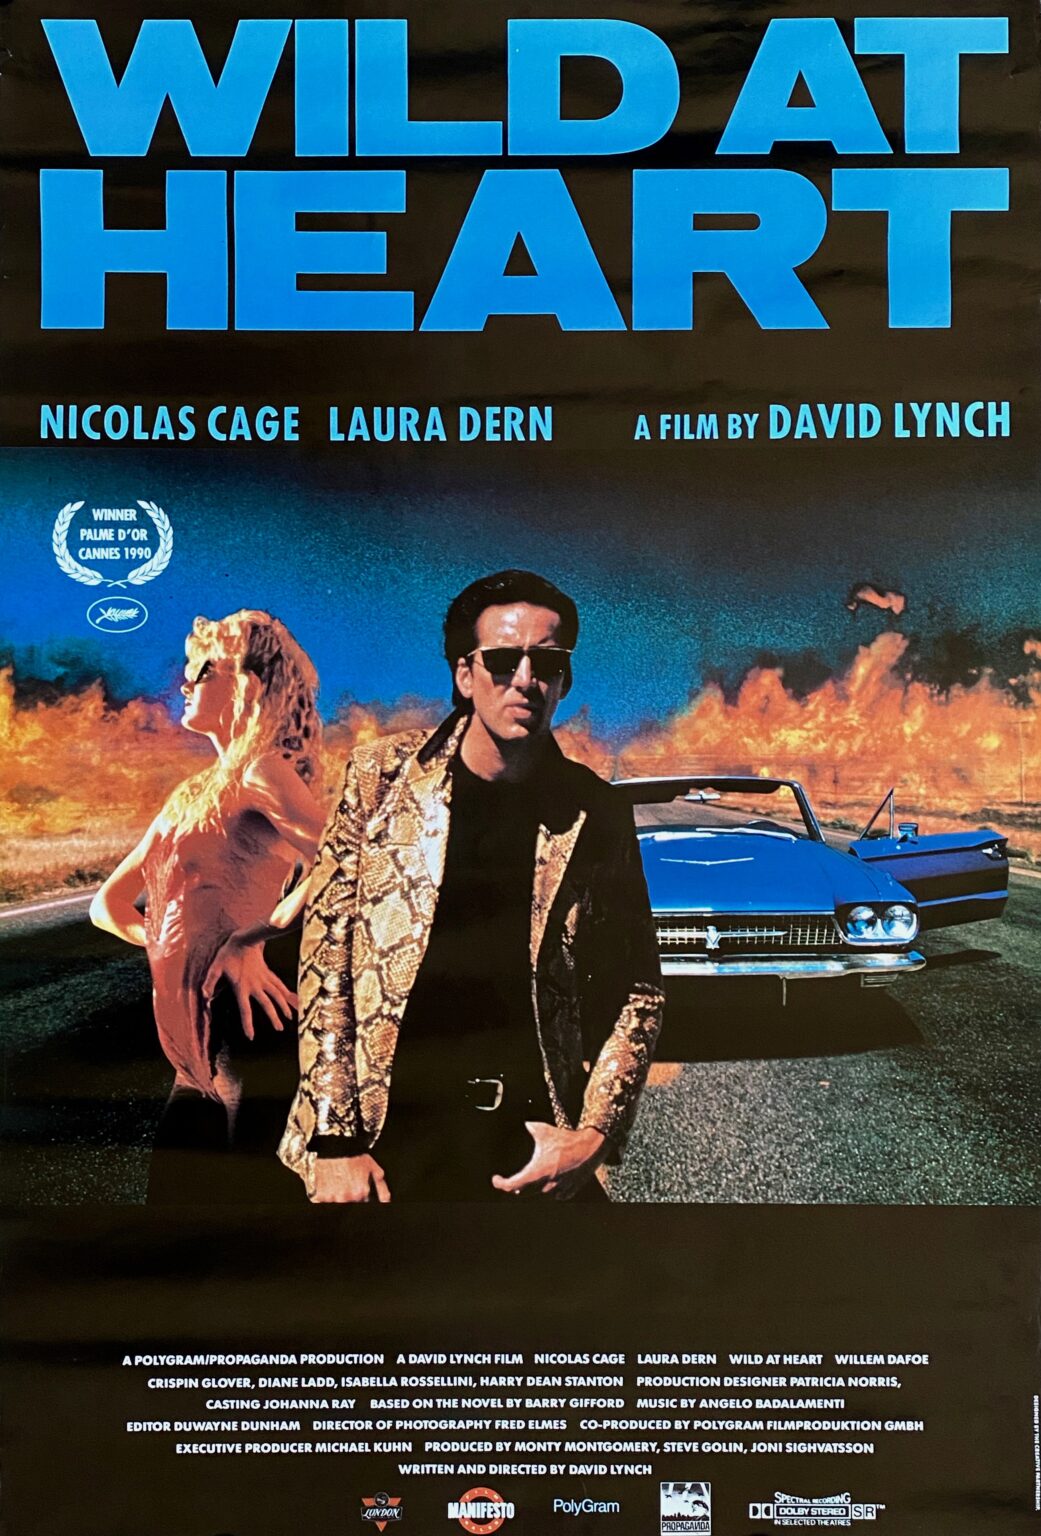 wild at heart filming with animals